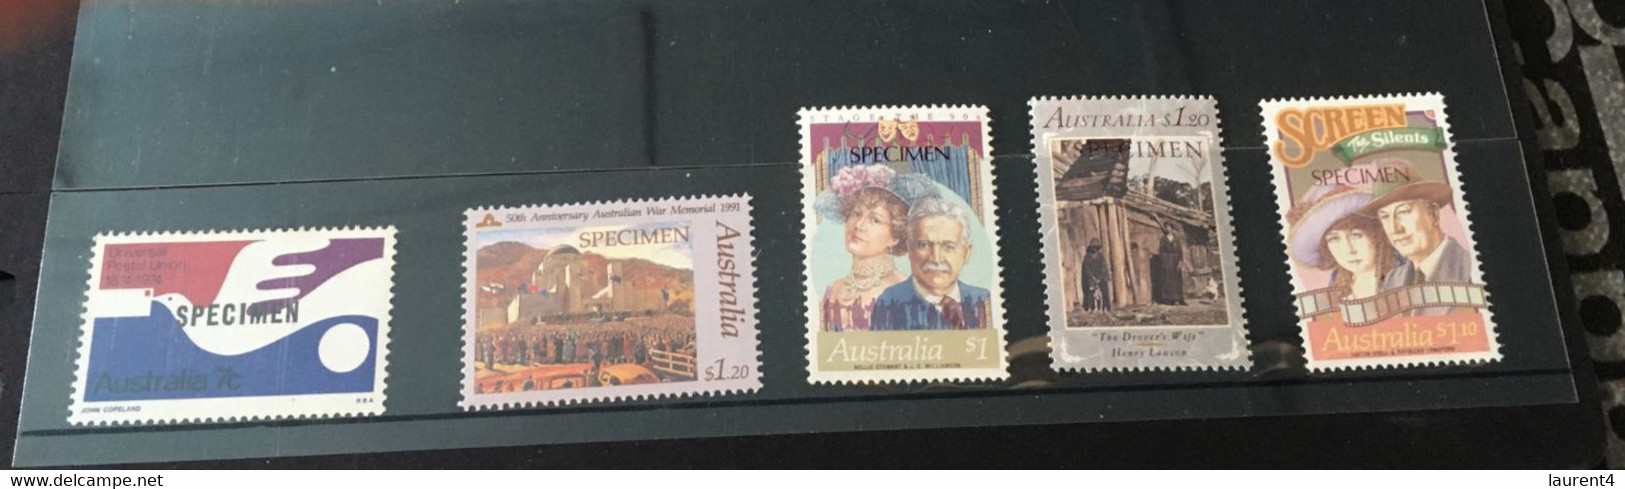 (Stamps 08-03-2021) Selection Of 5 High Values Issues Of SPECIMEN Stamps From Australia - Errors, Freaks & Oddities (EFO)